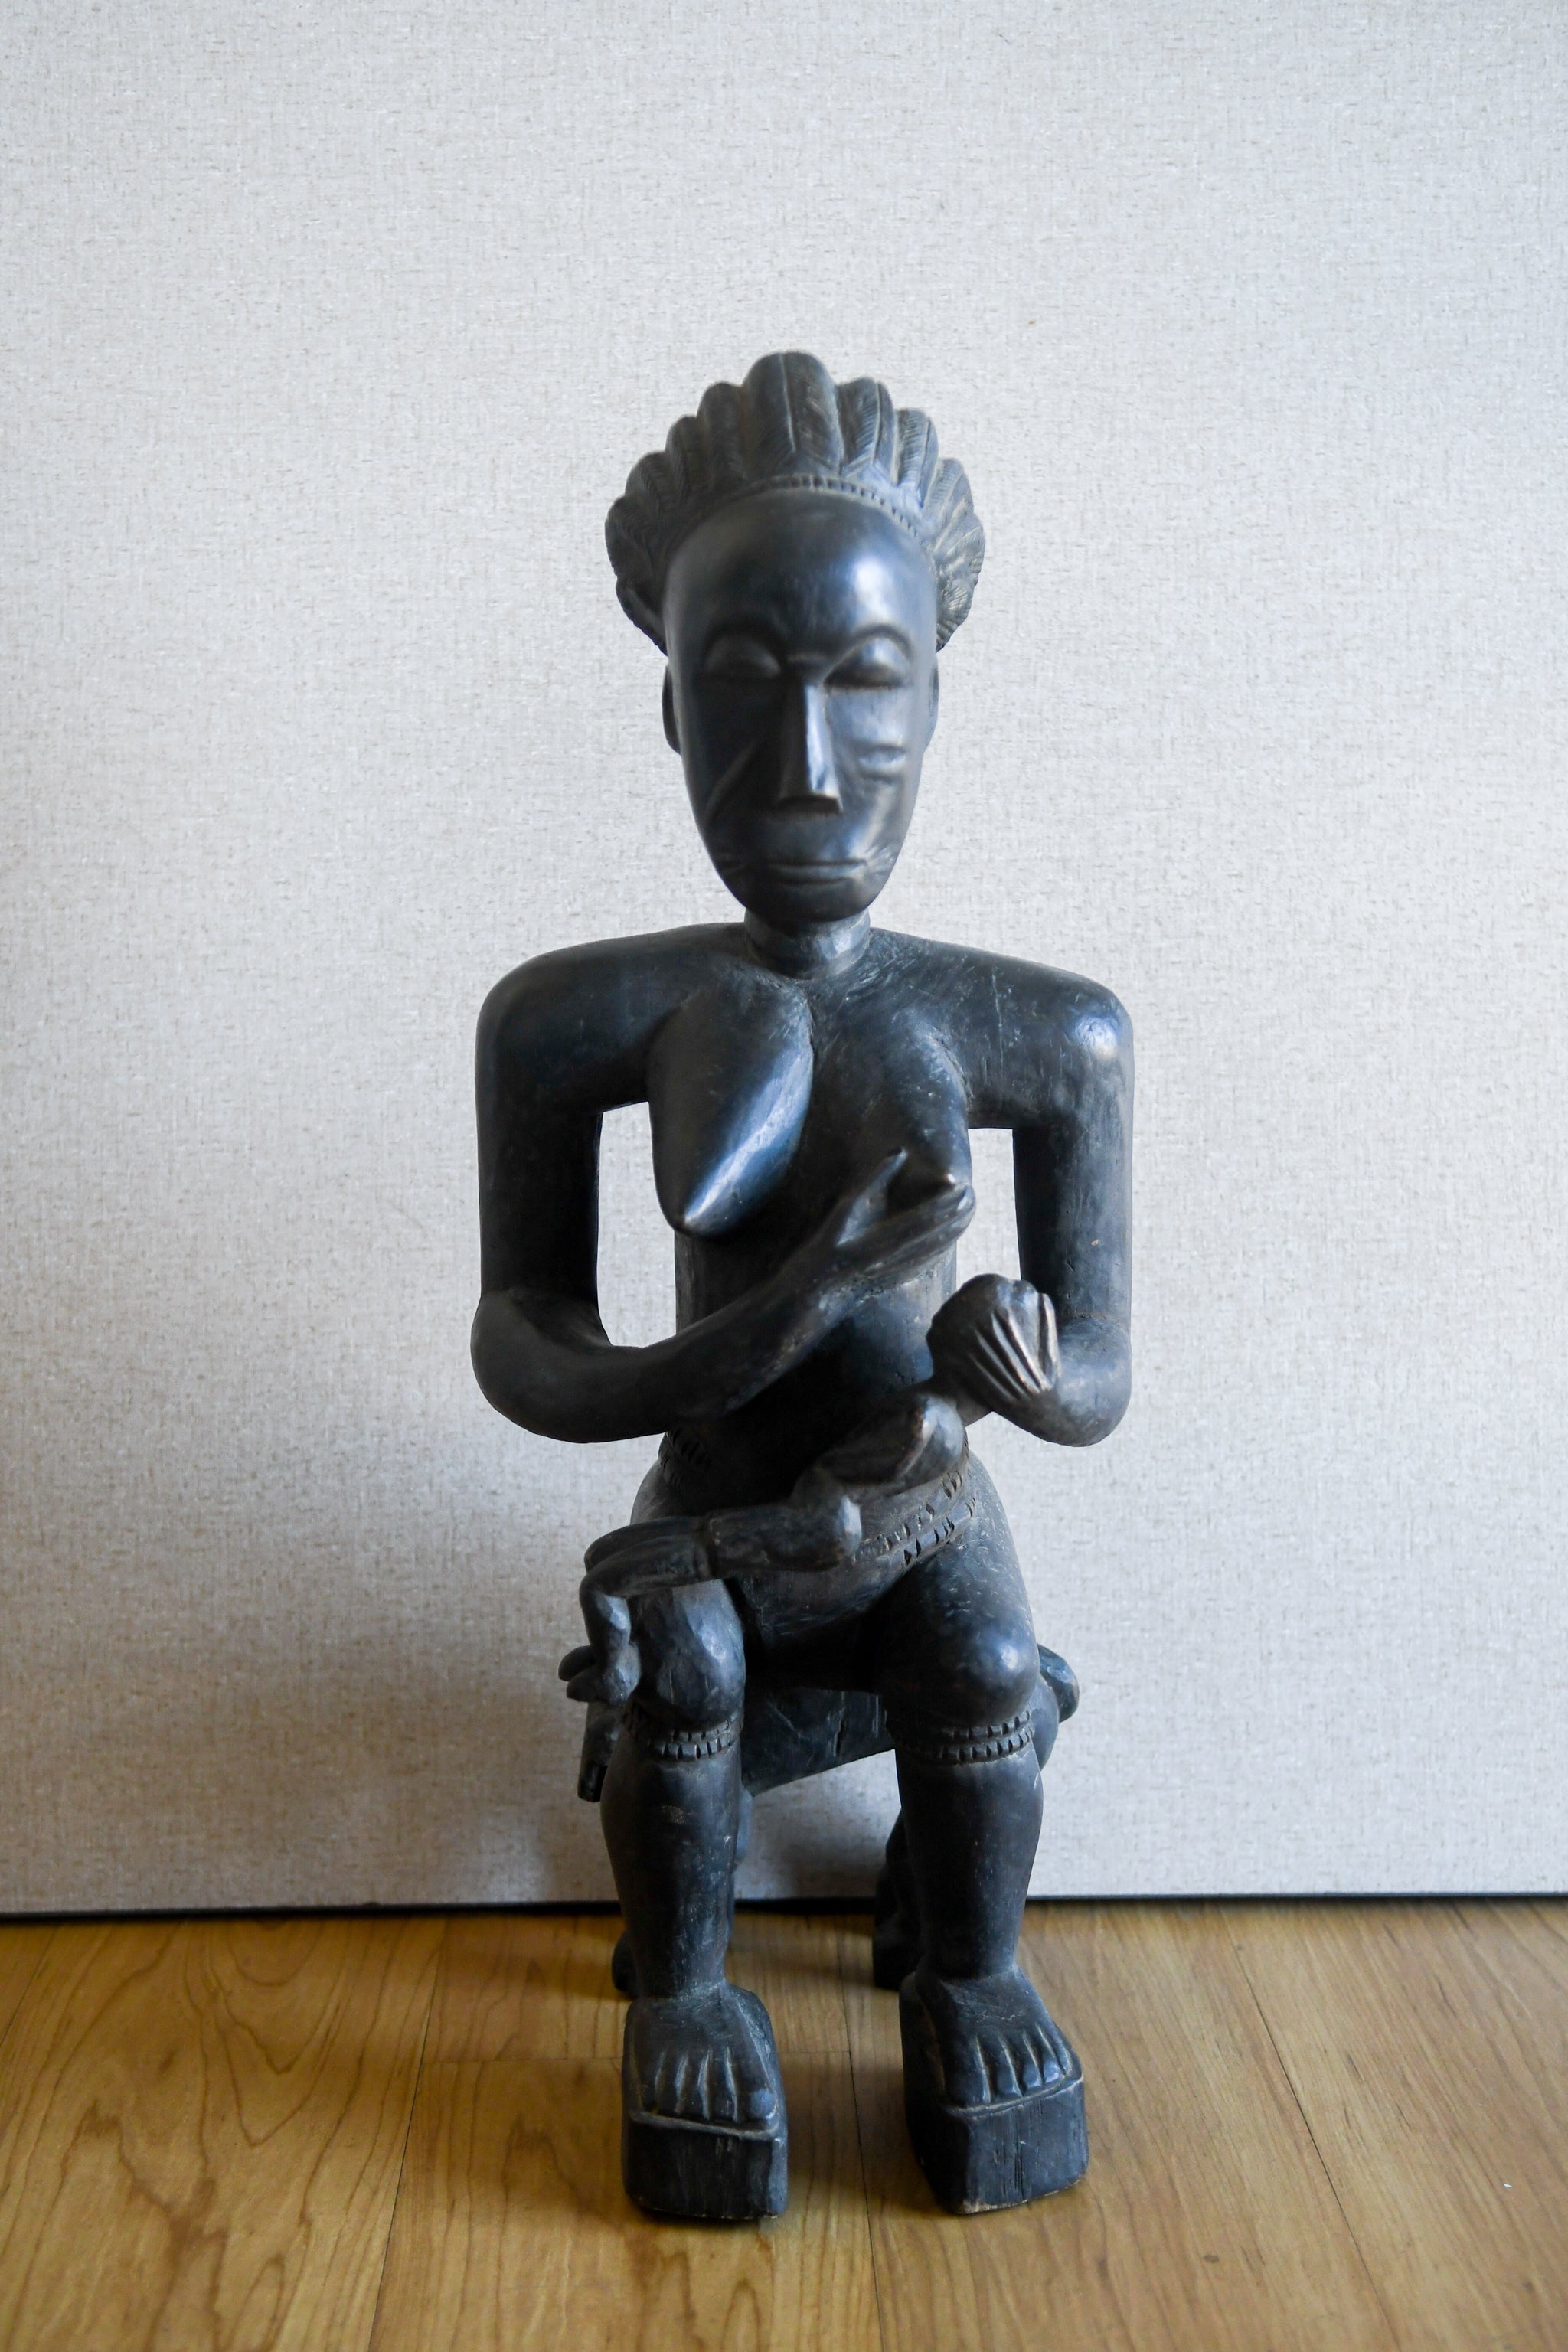 Tribal Sculptures - Traditional - Folk Art - African - Artwork - Objects - Artifacts - Statues Figures - Collectible - Ashanti Seated Maternity Figure - Carved Wood - Beauty Parenthood Workmanship - Timeless Design - Collectors Admire - Graceful Curves - Rich Colors